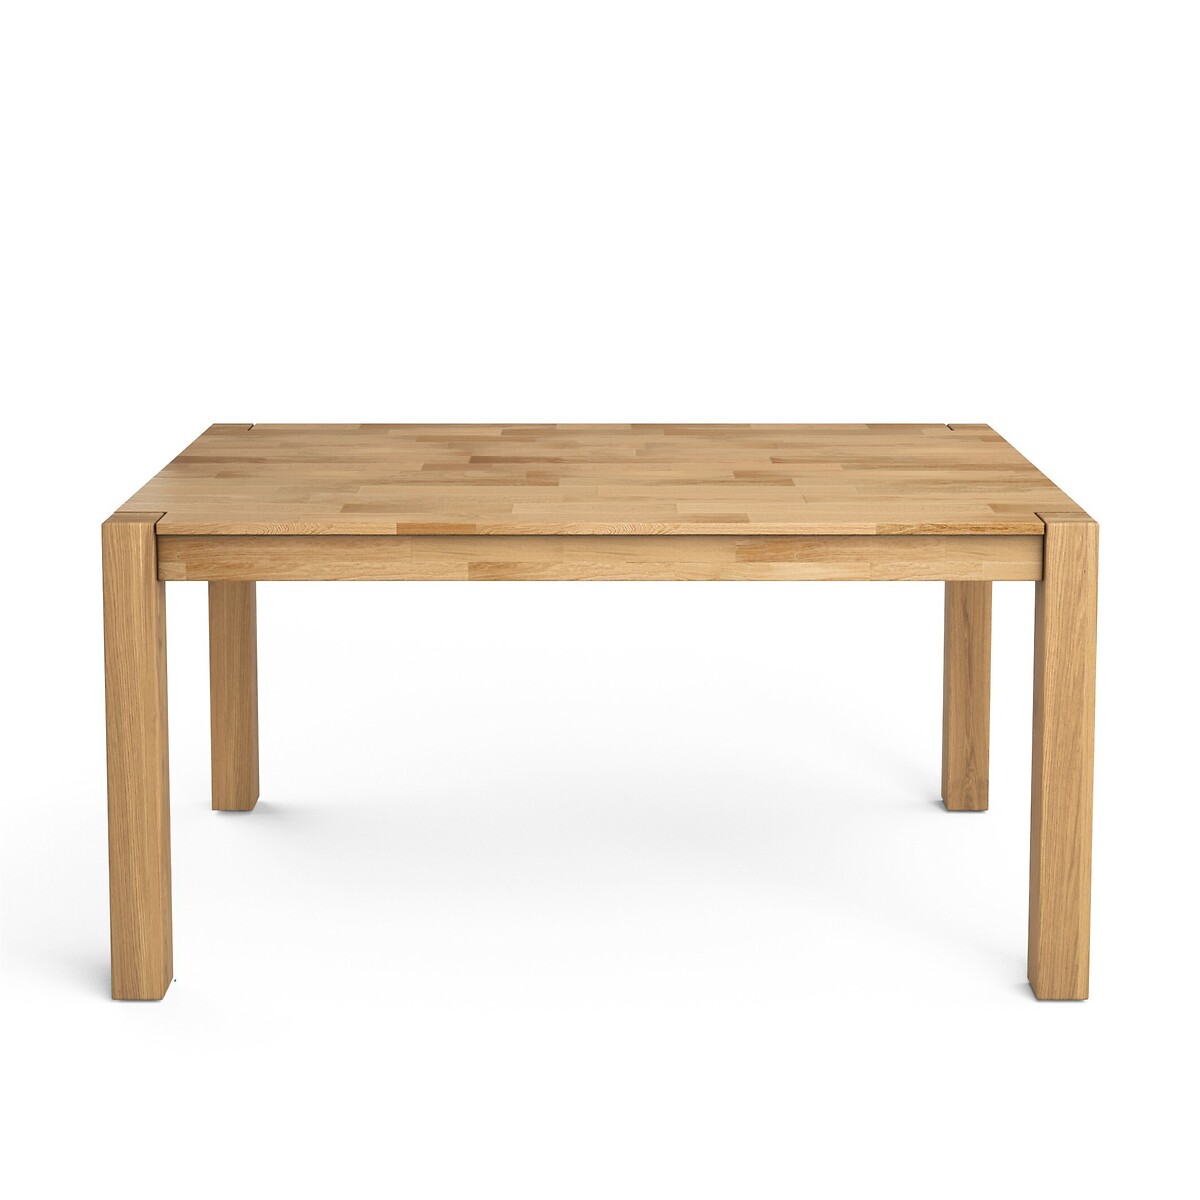 Adelita Oak Dining Table with 2 Extensions